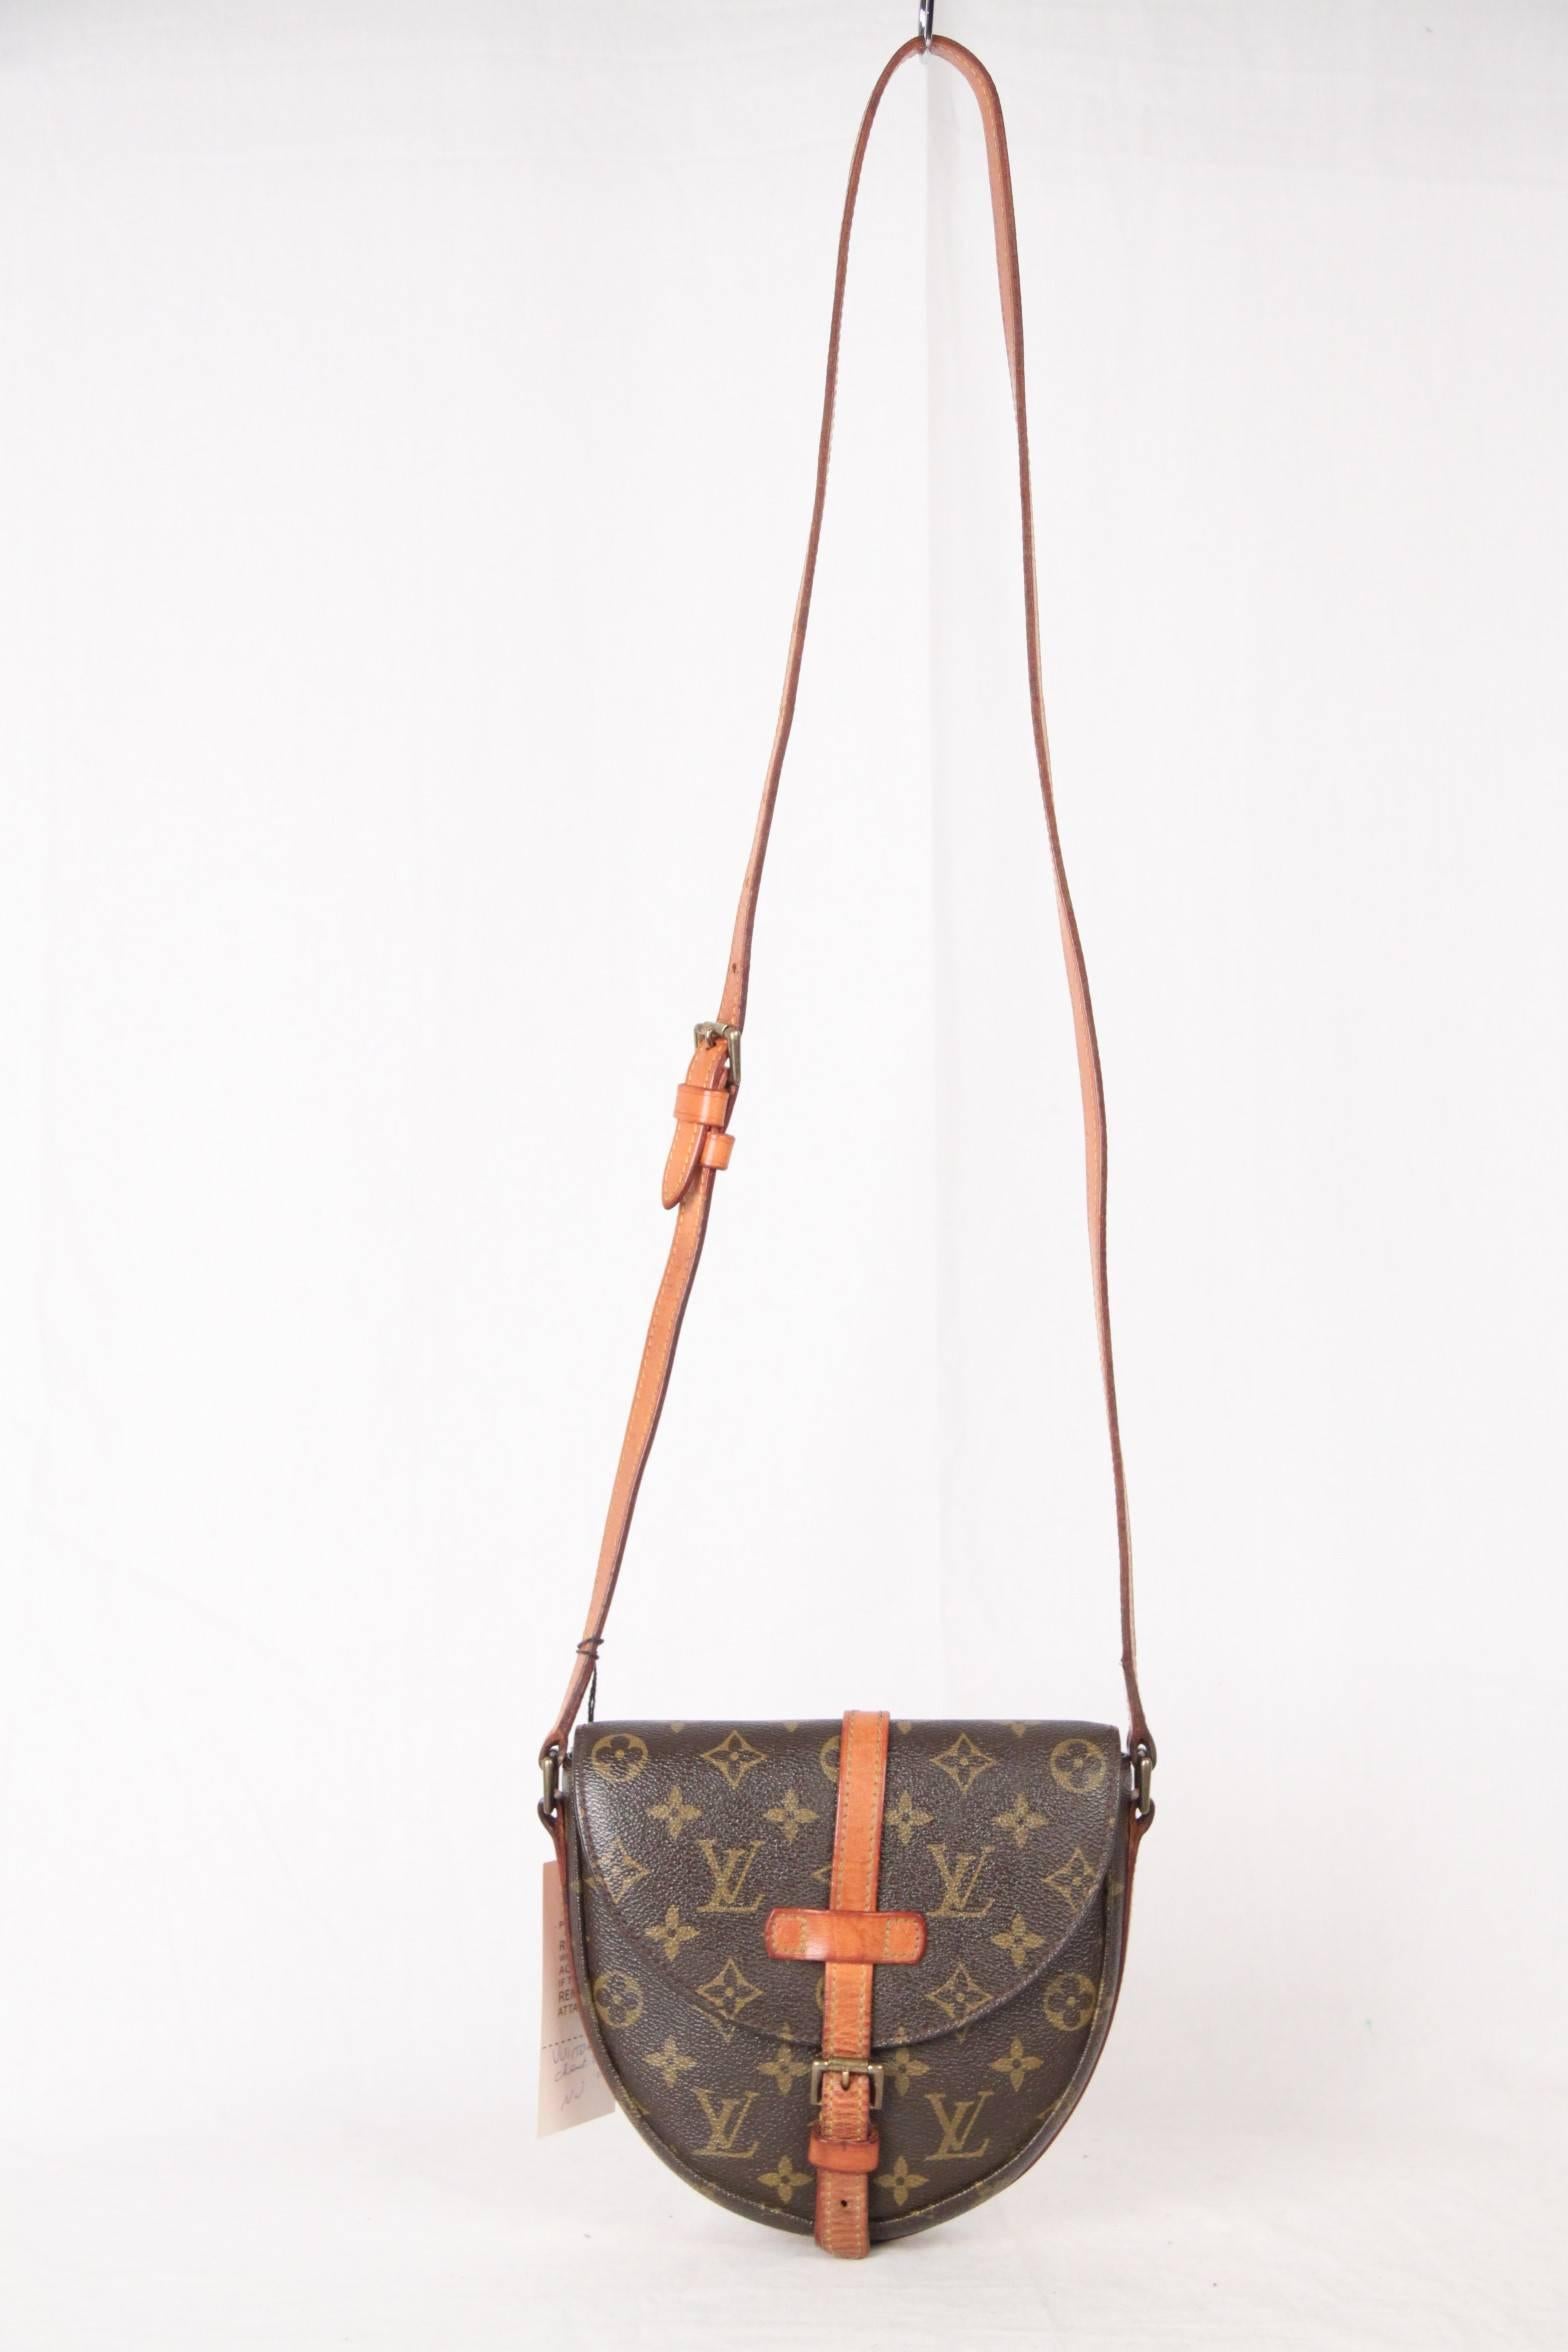 Brown monogram canvas 'Chantilly'crossbody bag from Louis Vuitton. Featuring a rounded shape and has a versatile adjustable shoulder strap that can be worn on the shoulder or cross-body for hands-free convenience. Foldover top, a buckle fastening